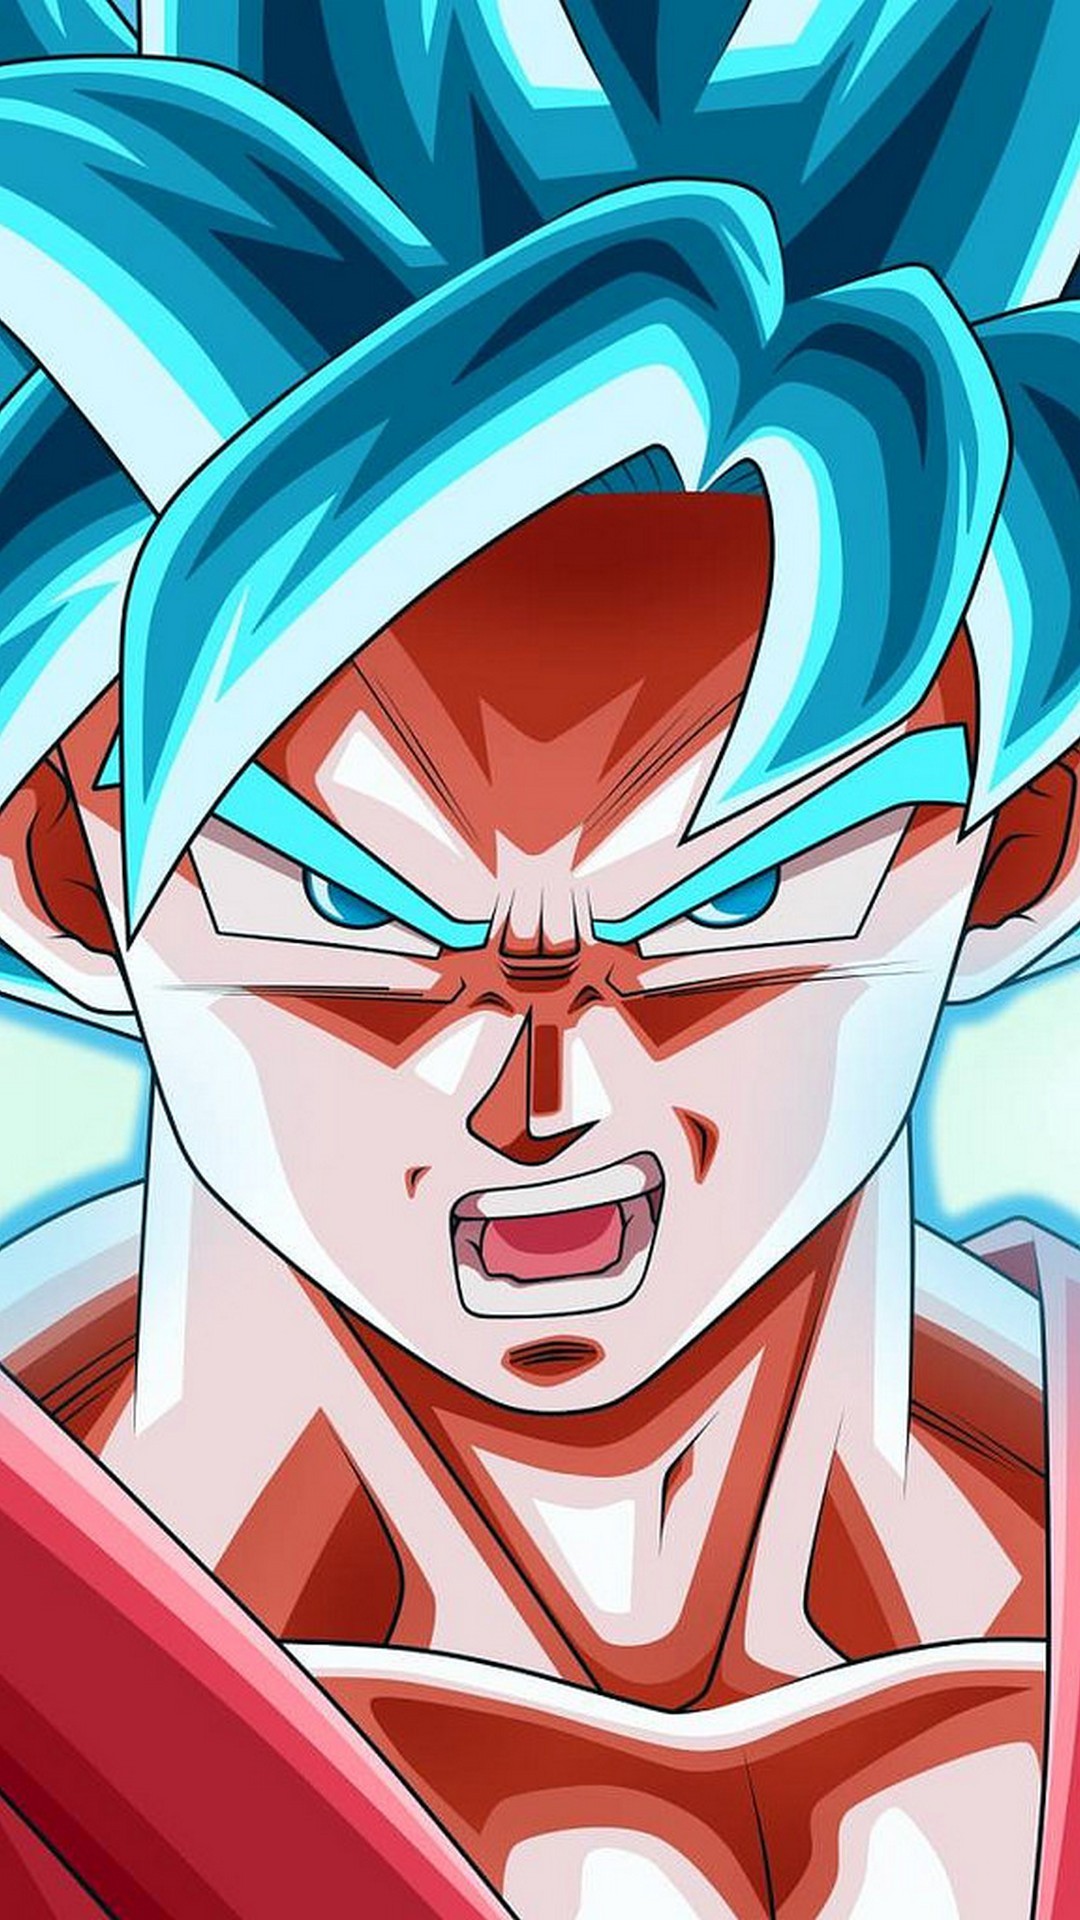 Wallpapers Goku SSJ Blue with image resolution 1080x1920 pixel. You can make this wallpaper for your iPhone 5, 6, 7, 8, X backgrounds, Mobile Screensaver, or iPad Lock Screen